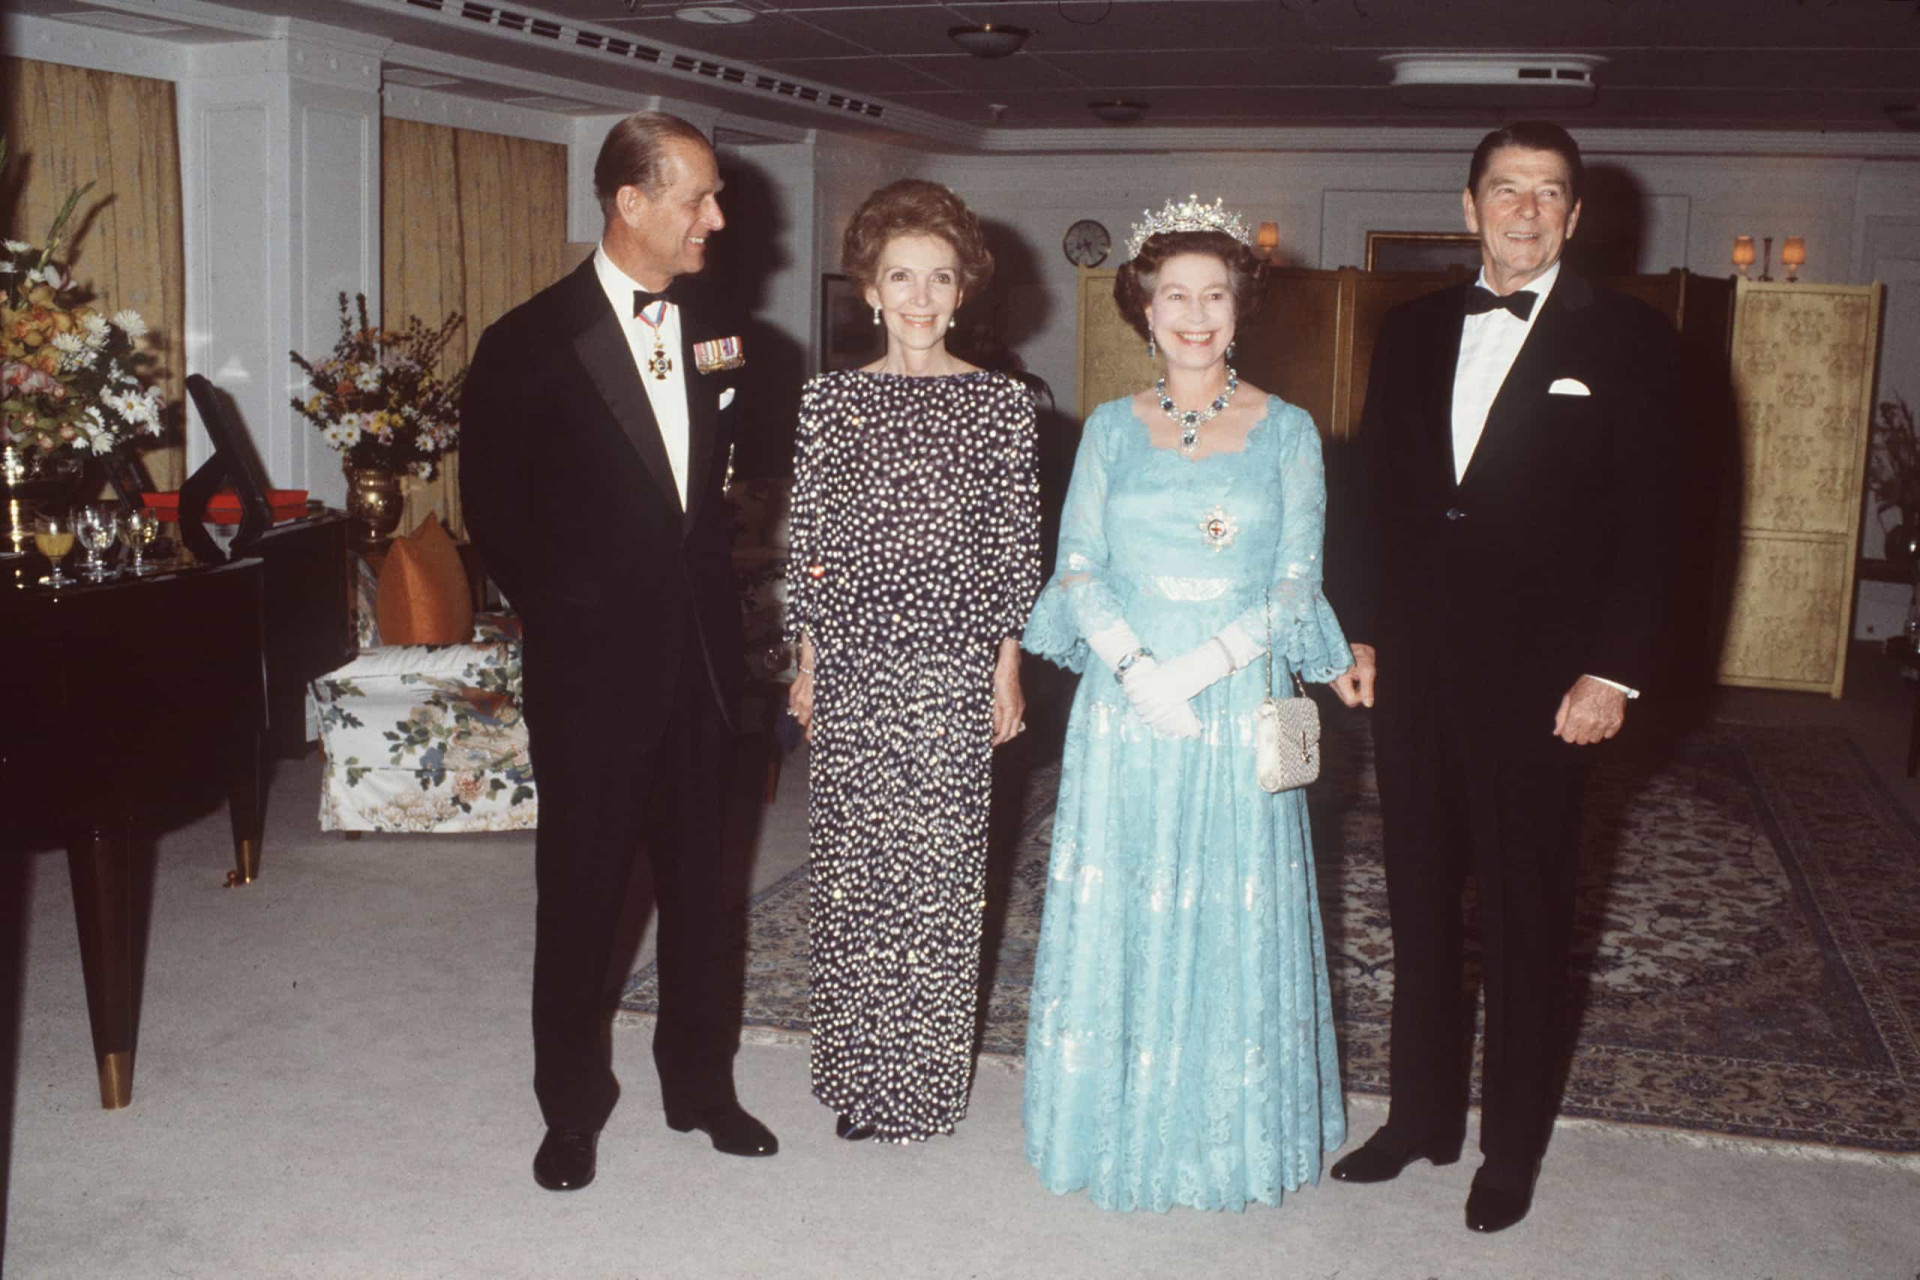 <p>Queen Elizabeth and Prince Philip with US President Ronald Reagan and his wife Nancy on board <em>Britannica</em> during an official tour of America in 1983. A banquet was held on the vessel on March 4, 1983 to celebrate the Reagan's wedding anniversary.</p><p><a href="https://www.msn.com/en-us/community/channel/vid-7xx8mnucu55yw63we9va2gwr7uihbxwc68fxqp25x6tg4ftibpra?cvid=94631541bc0f4f89bfd59158d696ad7e">Follow us and access great exclusive content every day</a></p>